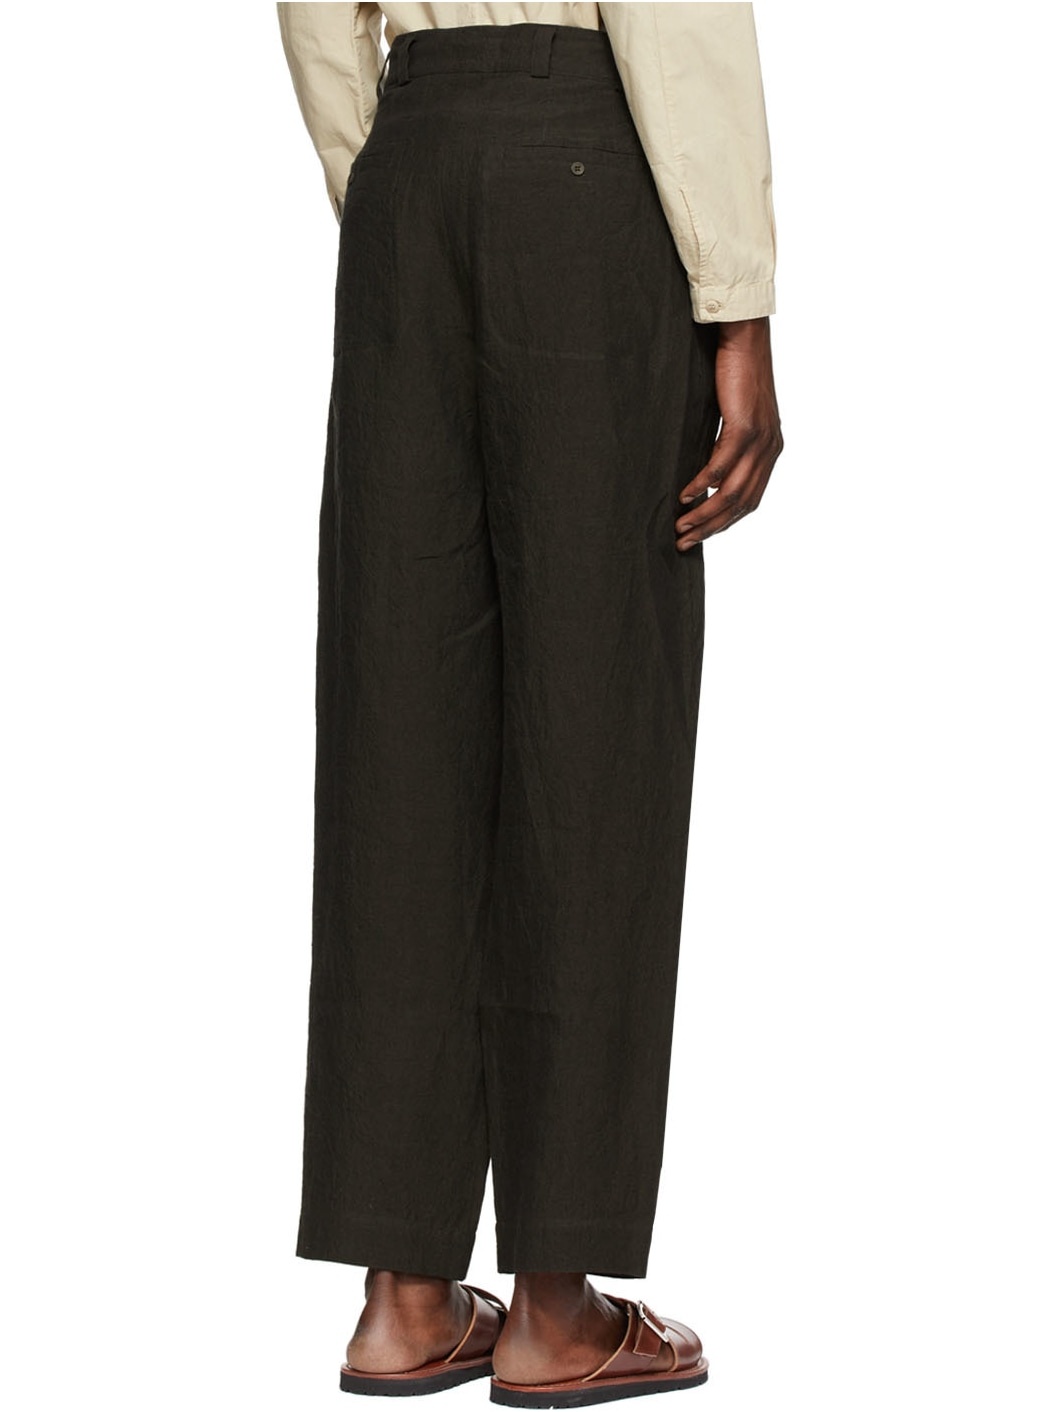 Green 'The Botanist' Trousers - 3